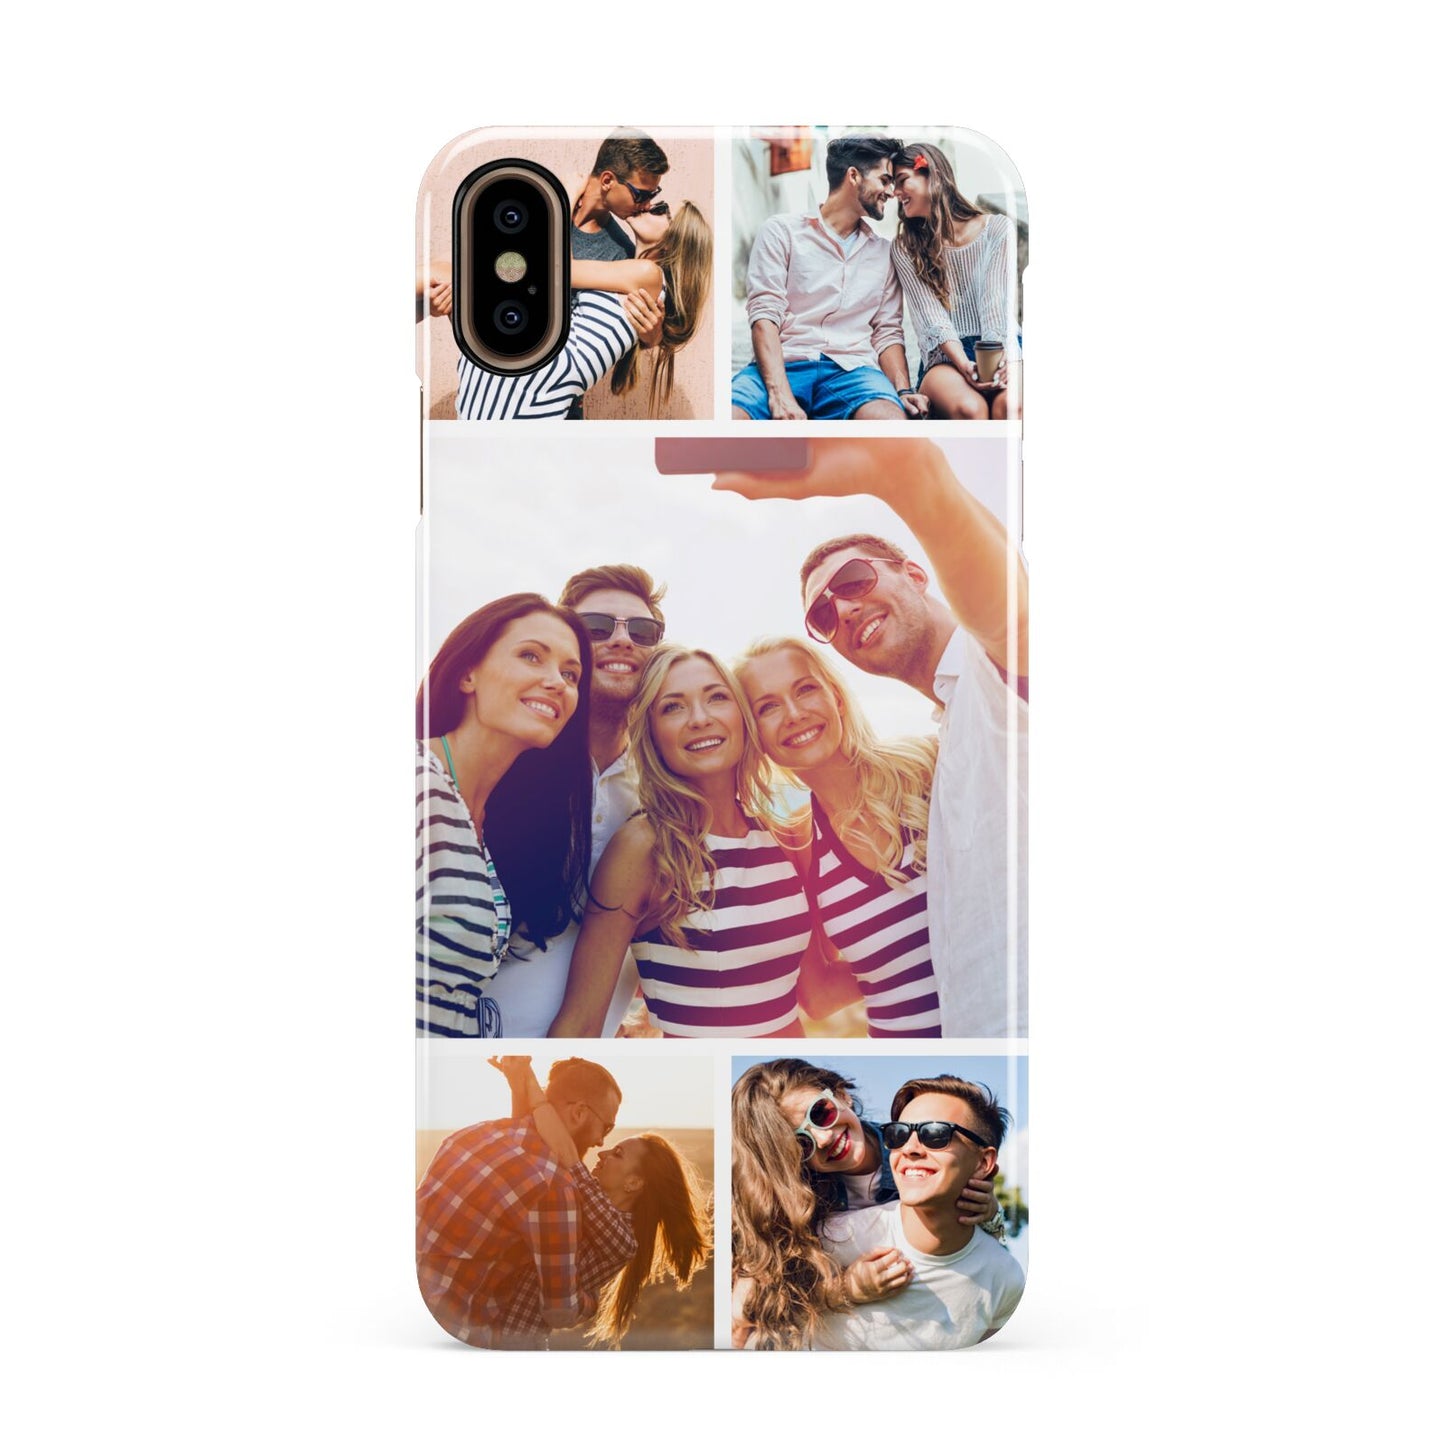 Tile Photo Collage Upload Apple iPhone Xs Max 3D Snap Case